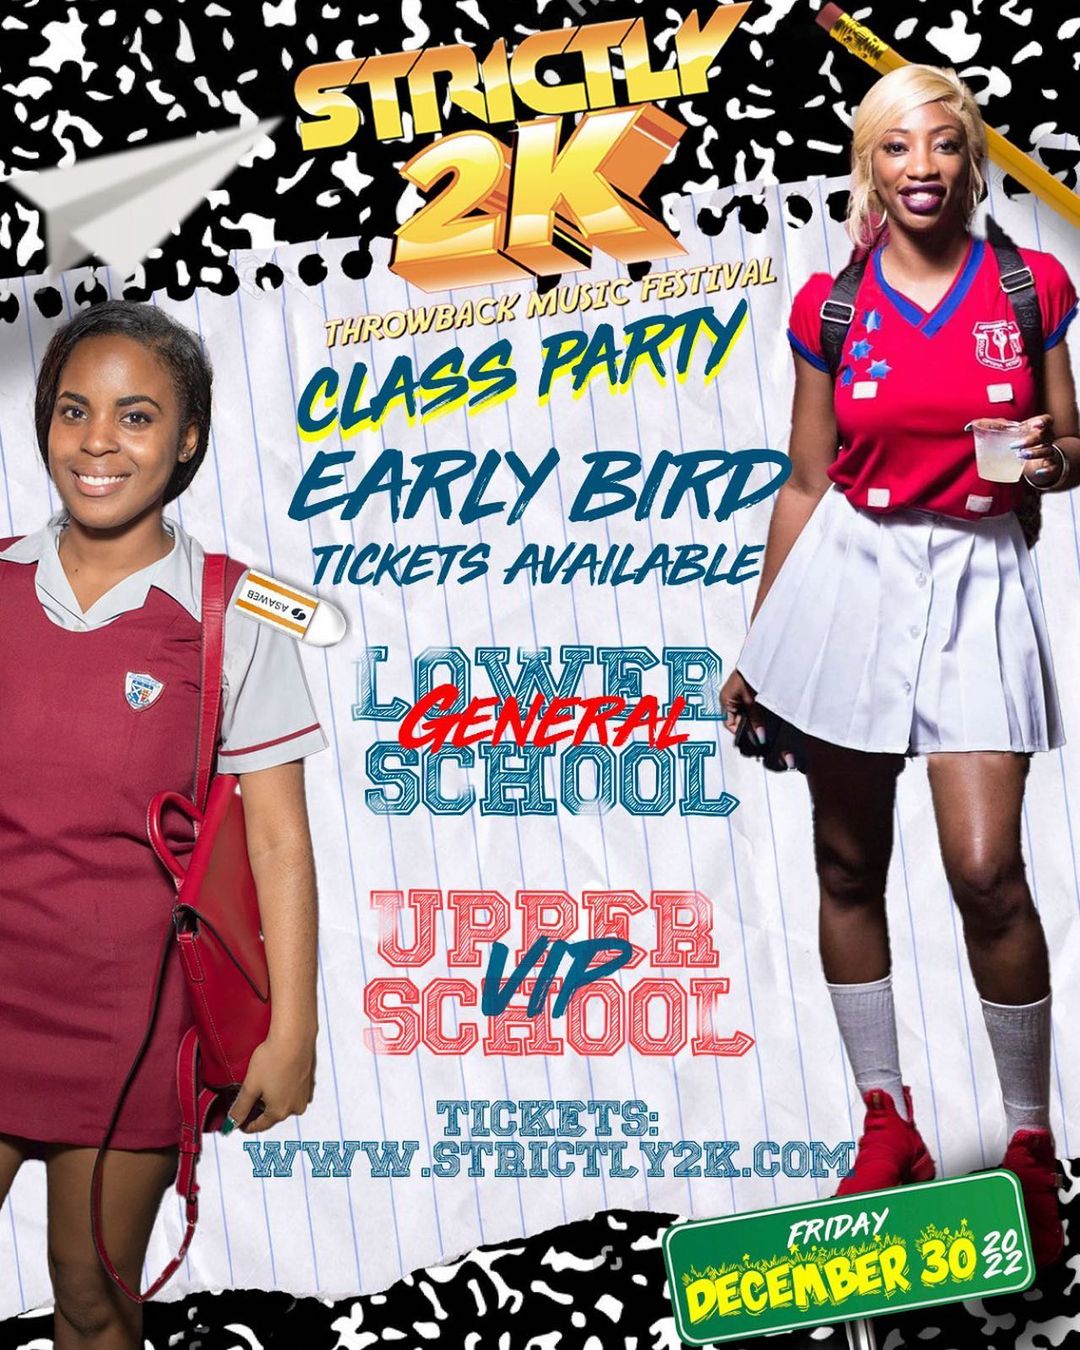 Strictly 2K Class Party